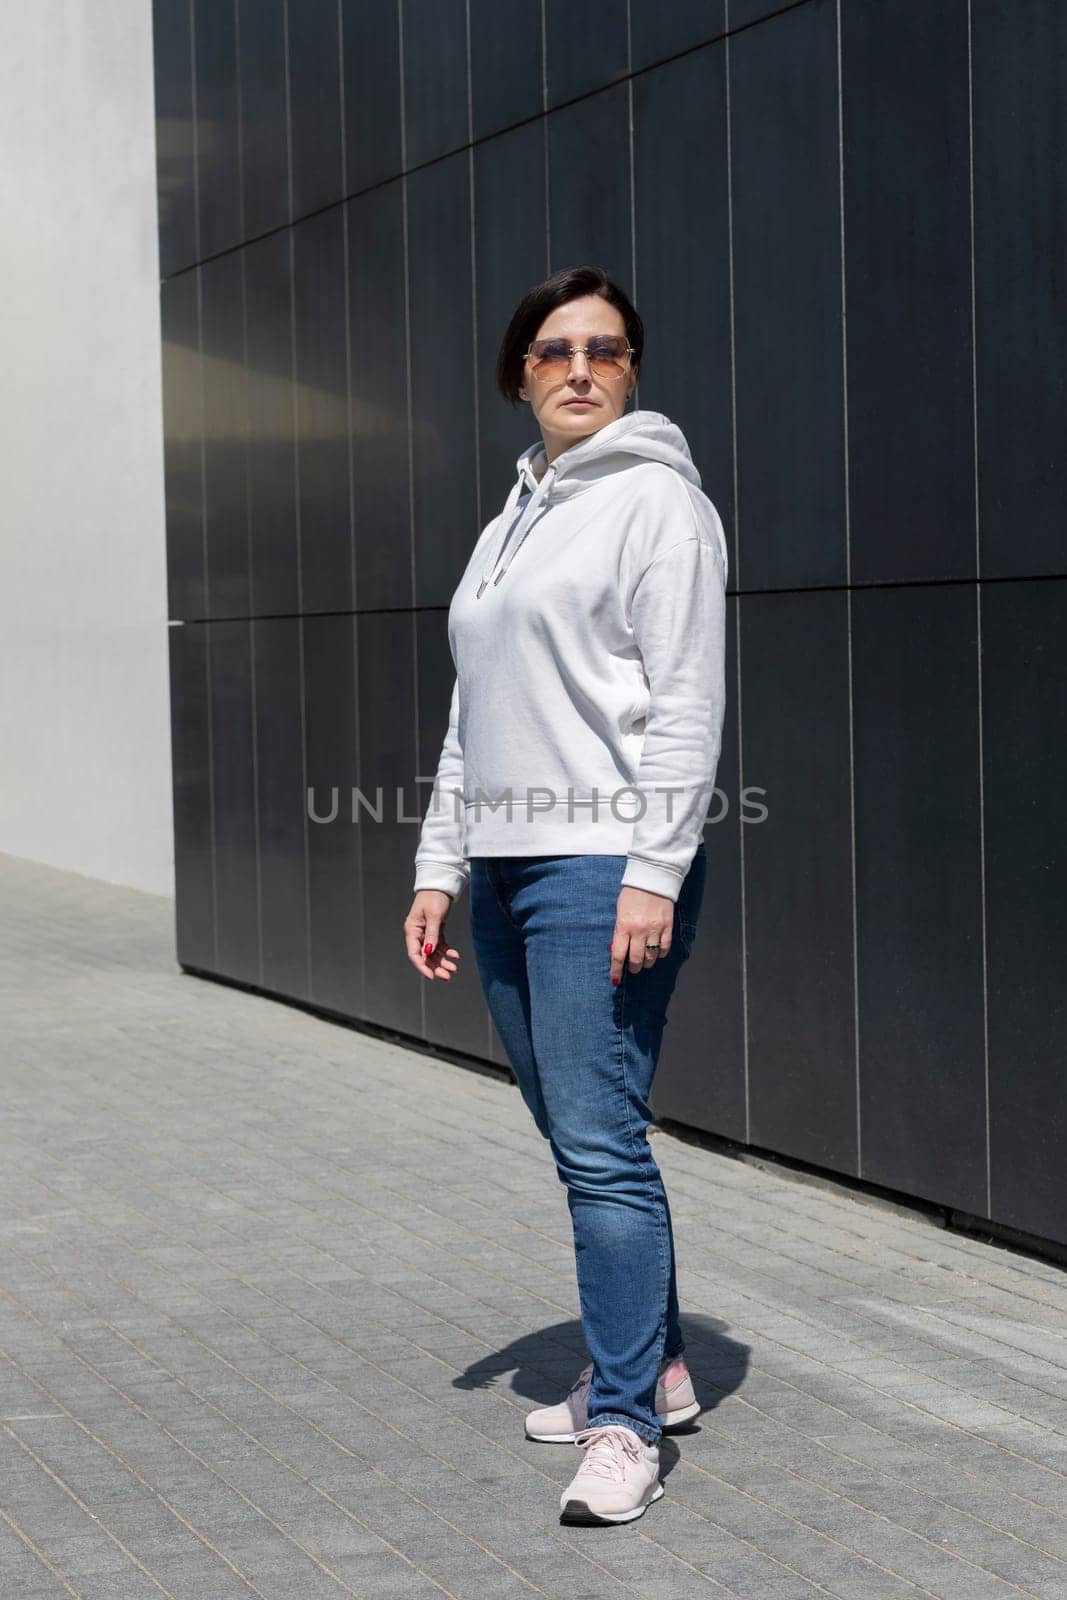 Full Length Pretty Mature Brunette Woman in White Hoodie, Jeans and Sunglasses Looks Away, Dark Background Wall. Sportive Confident 40 Yo Beautiful Caucasian Woman in Urban Area Vertical Plane.